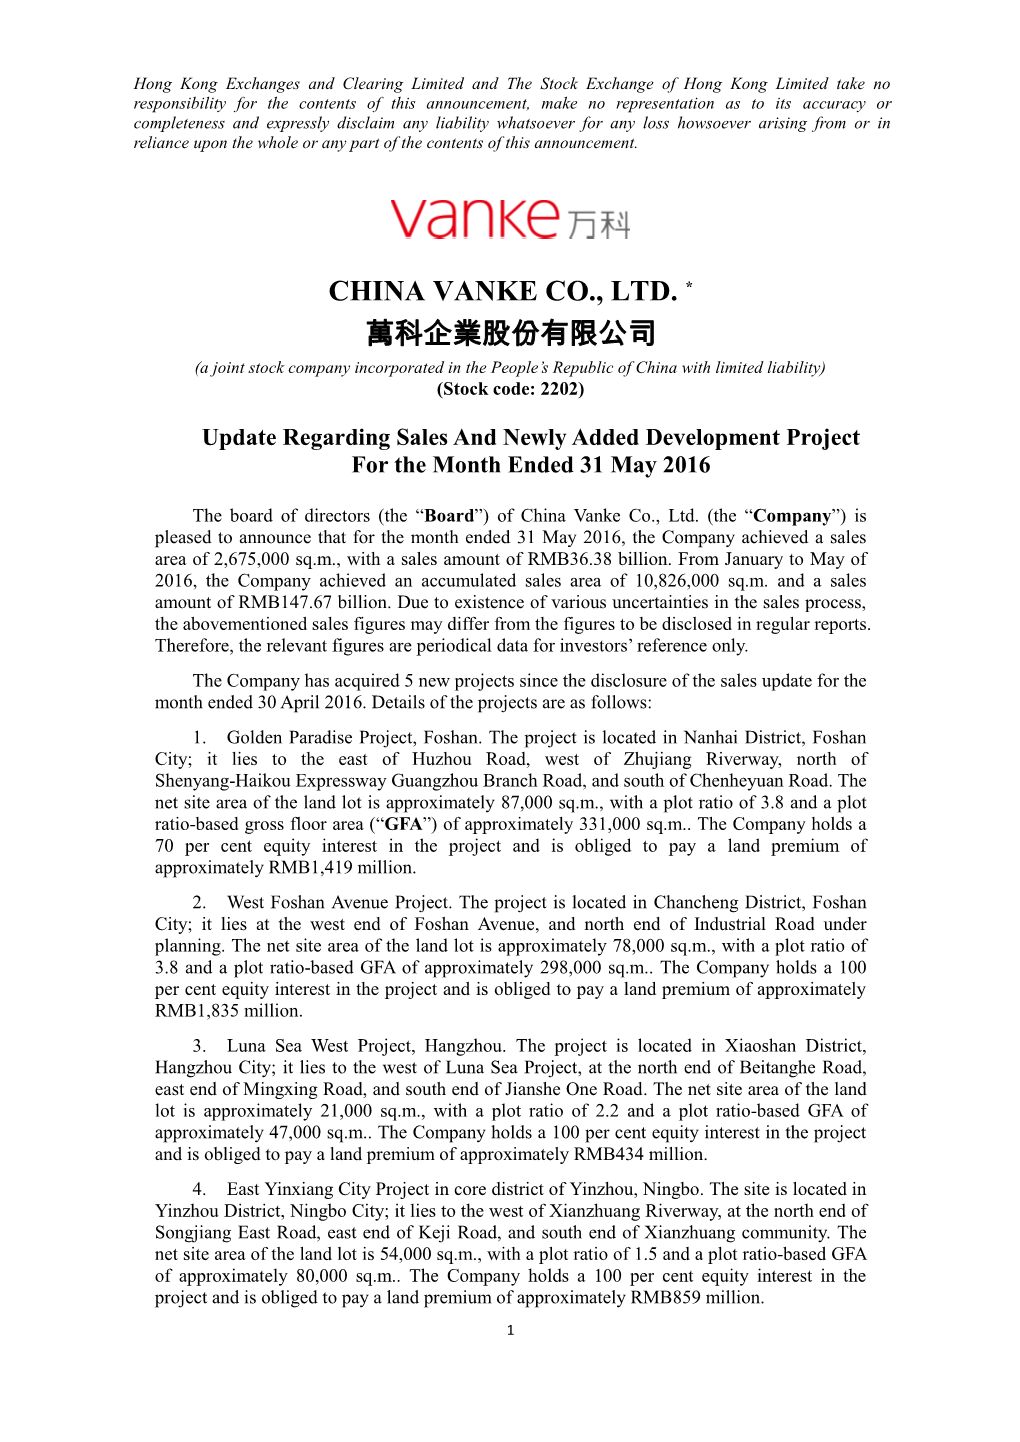 CHINA VANKE CO., LTD. * 萬科企業股份有限公司 (A Joint Stock Company Incorporated in the People’S Republic of China with Limited Liability) (Stock Code: 2202)